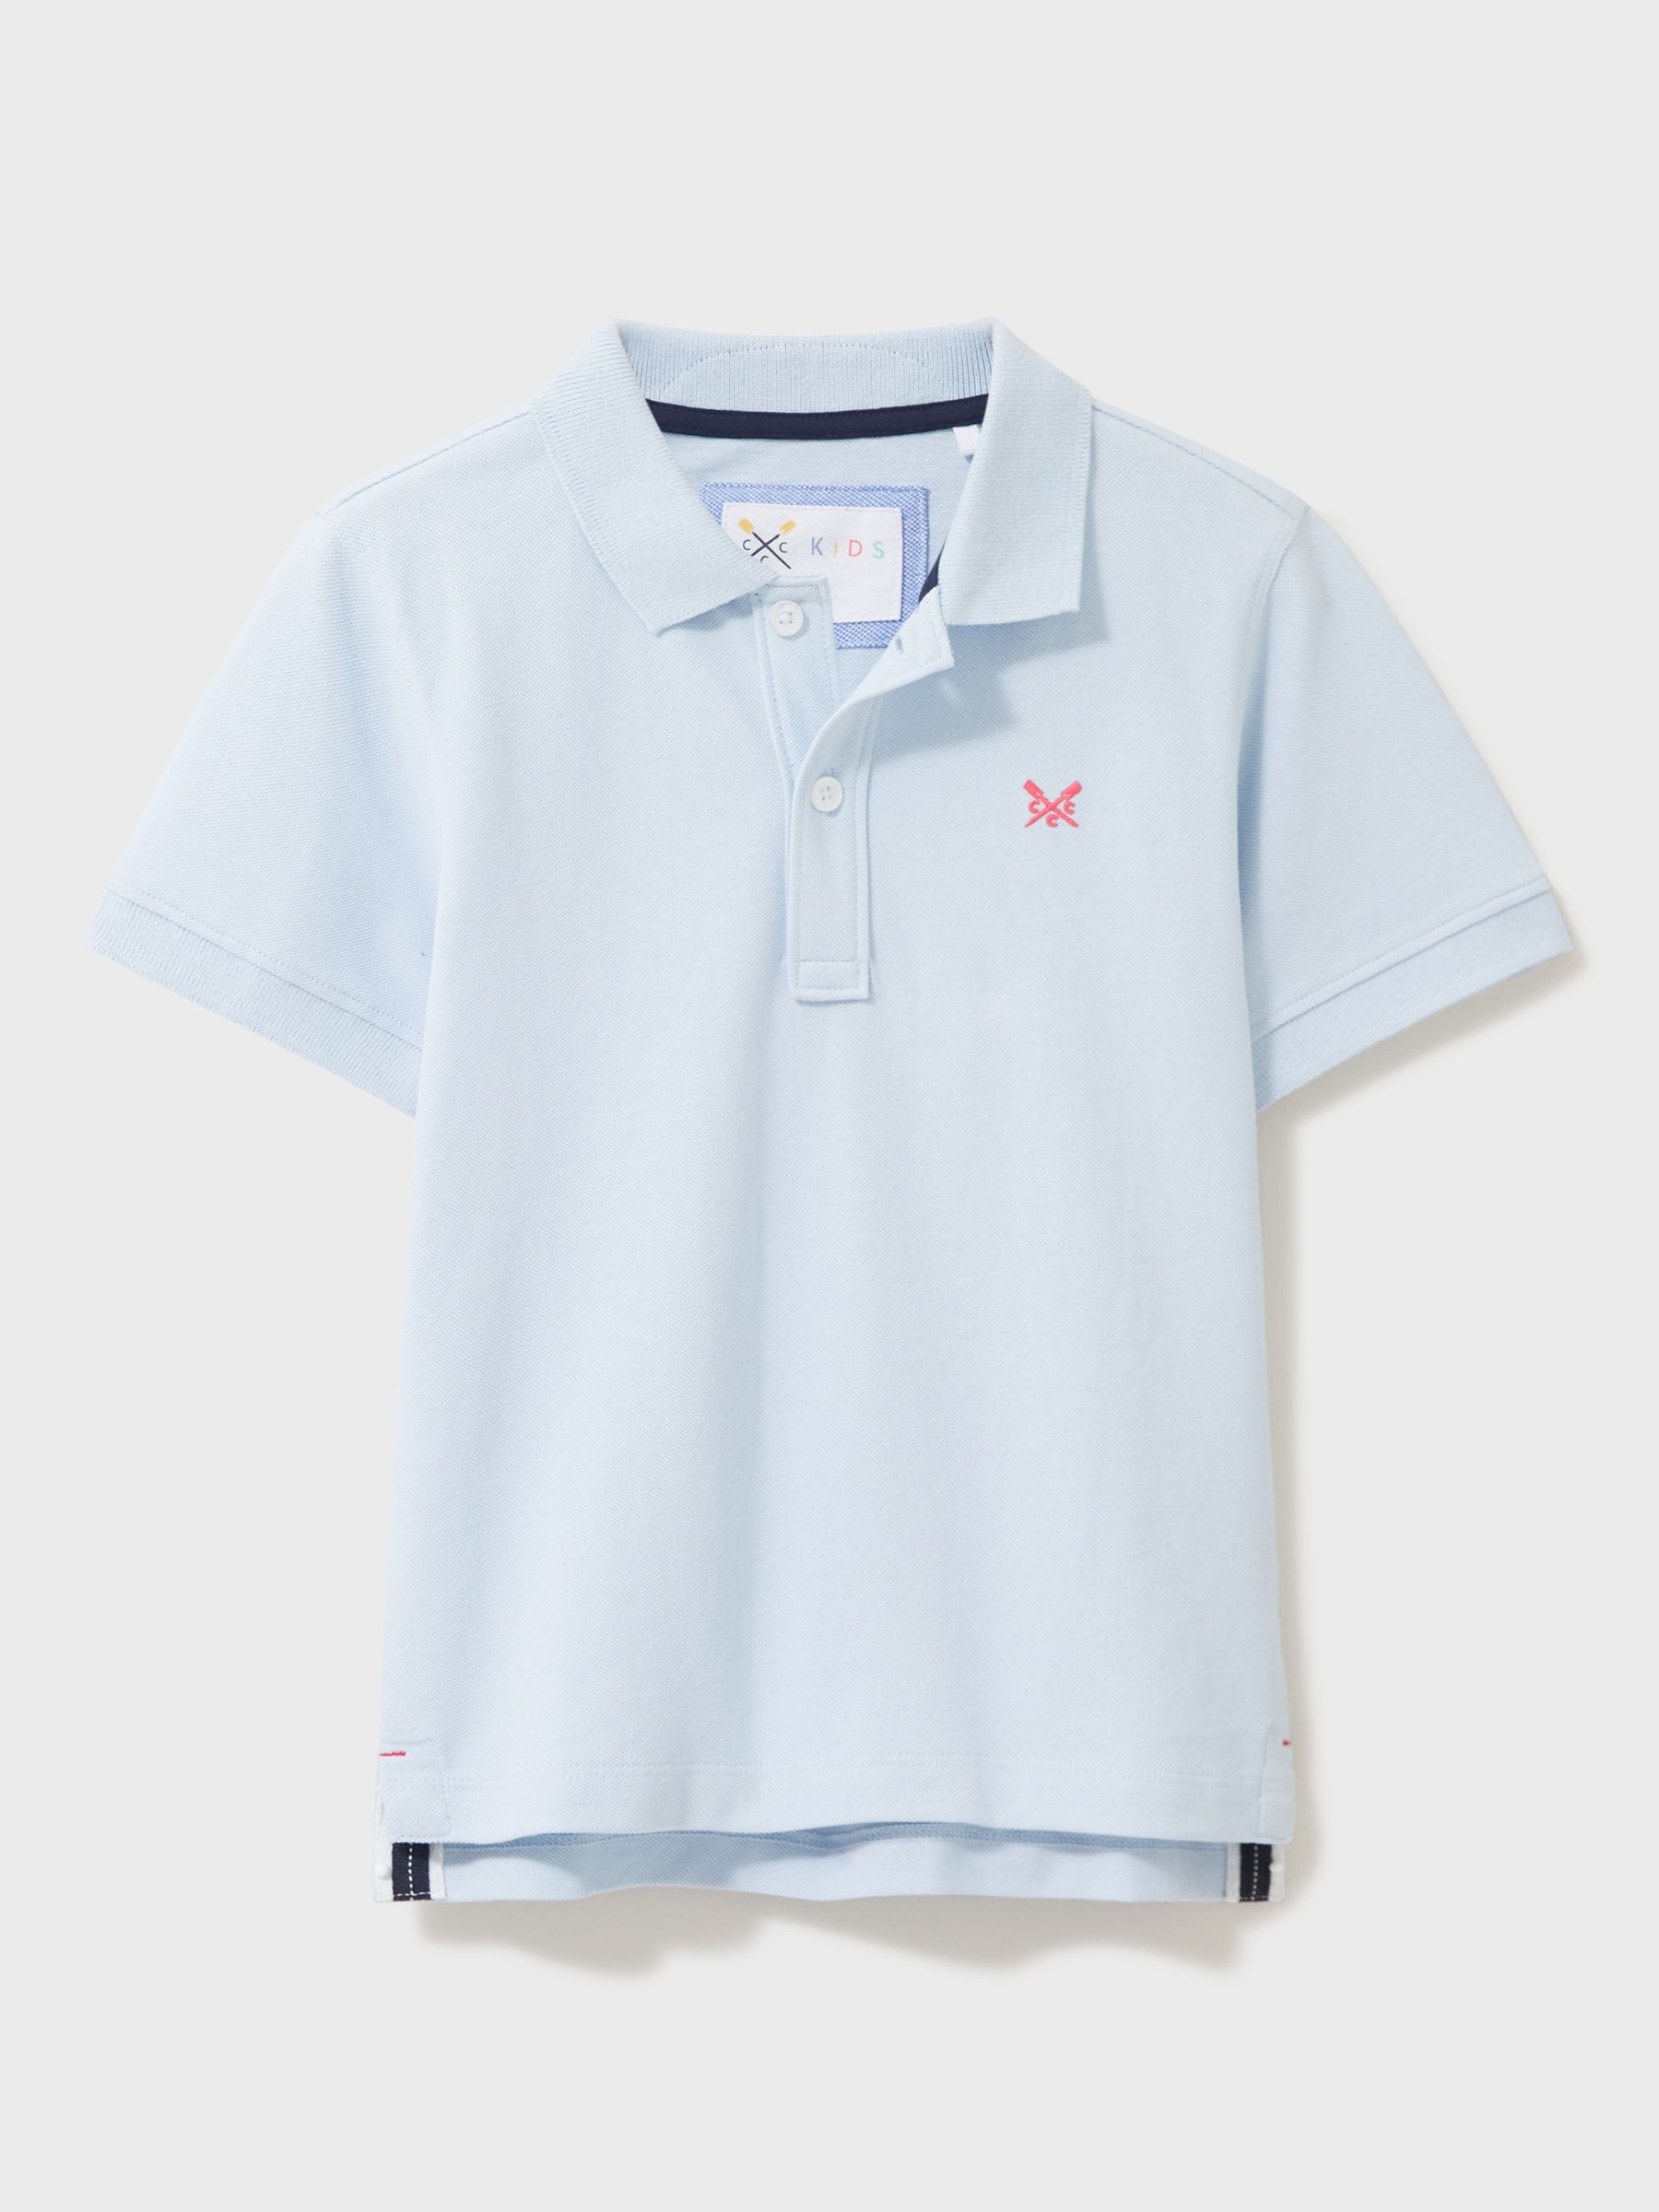 Crew Clothing Kids' Pique Polo, Pale Blue at John Lewis & Partners